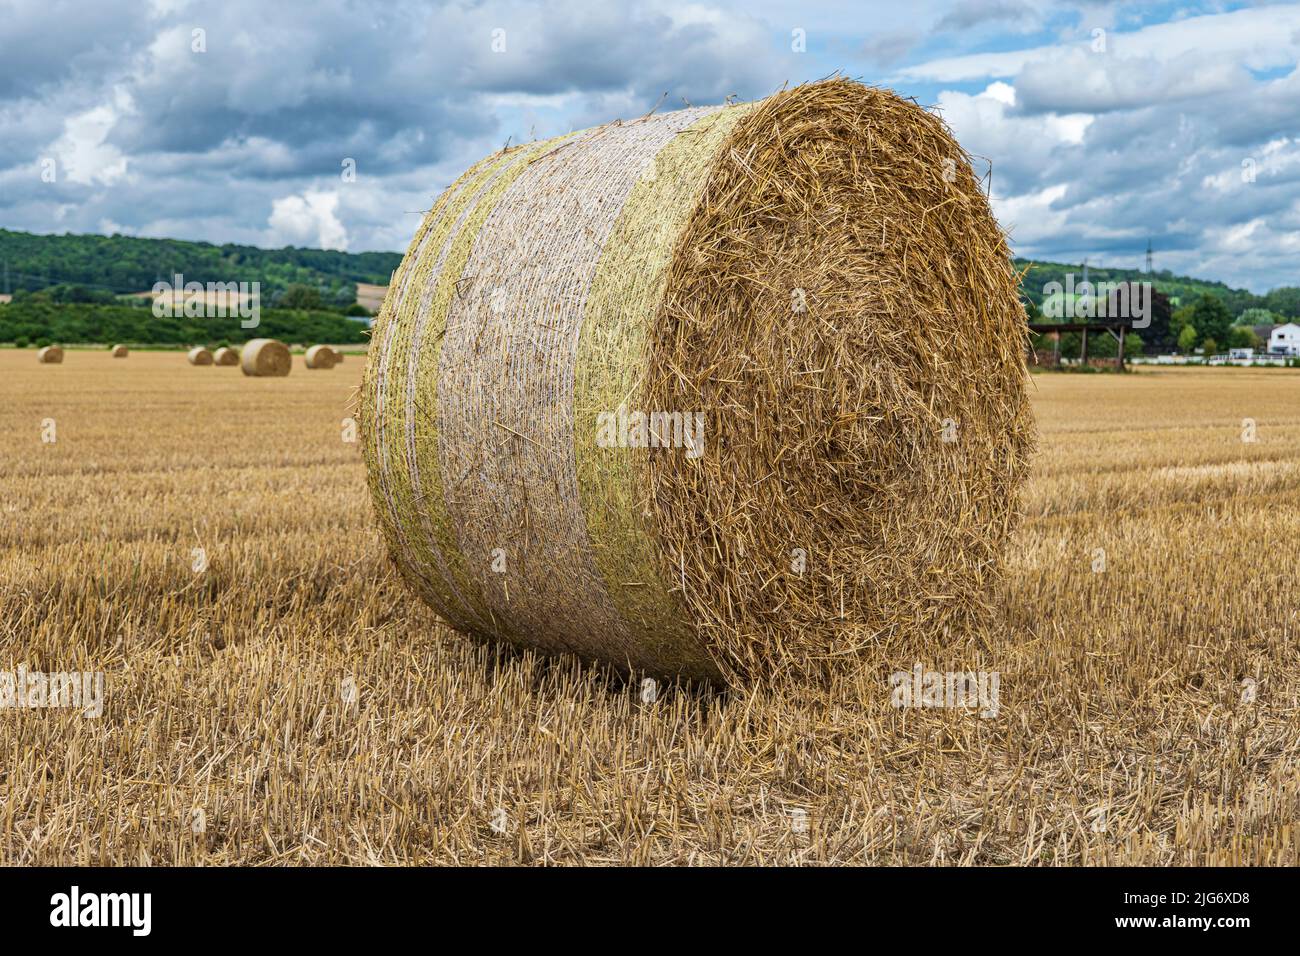 a large straw roll on a stubble field Stock Photo